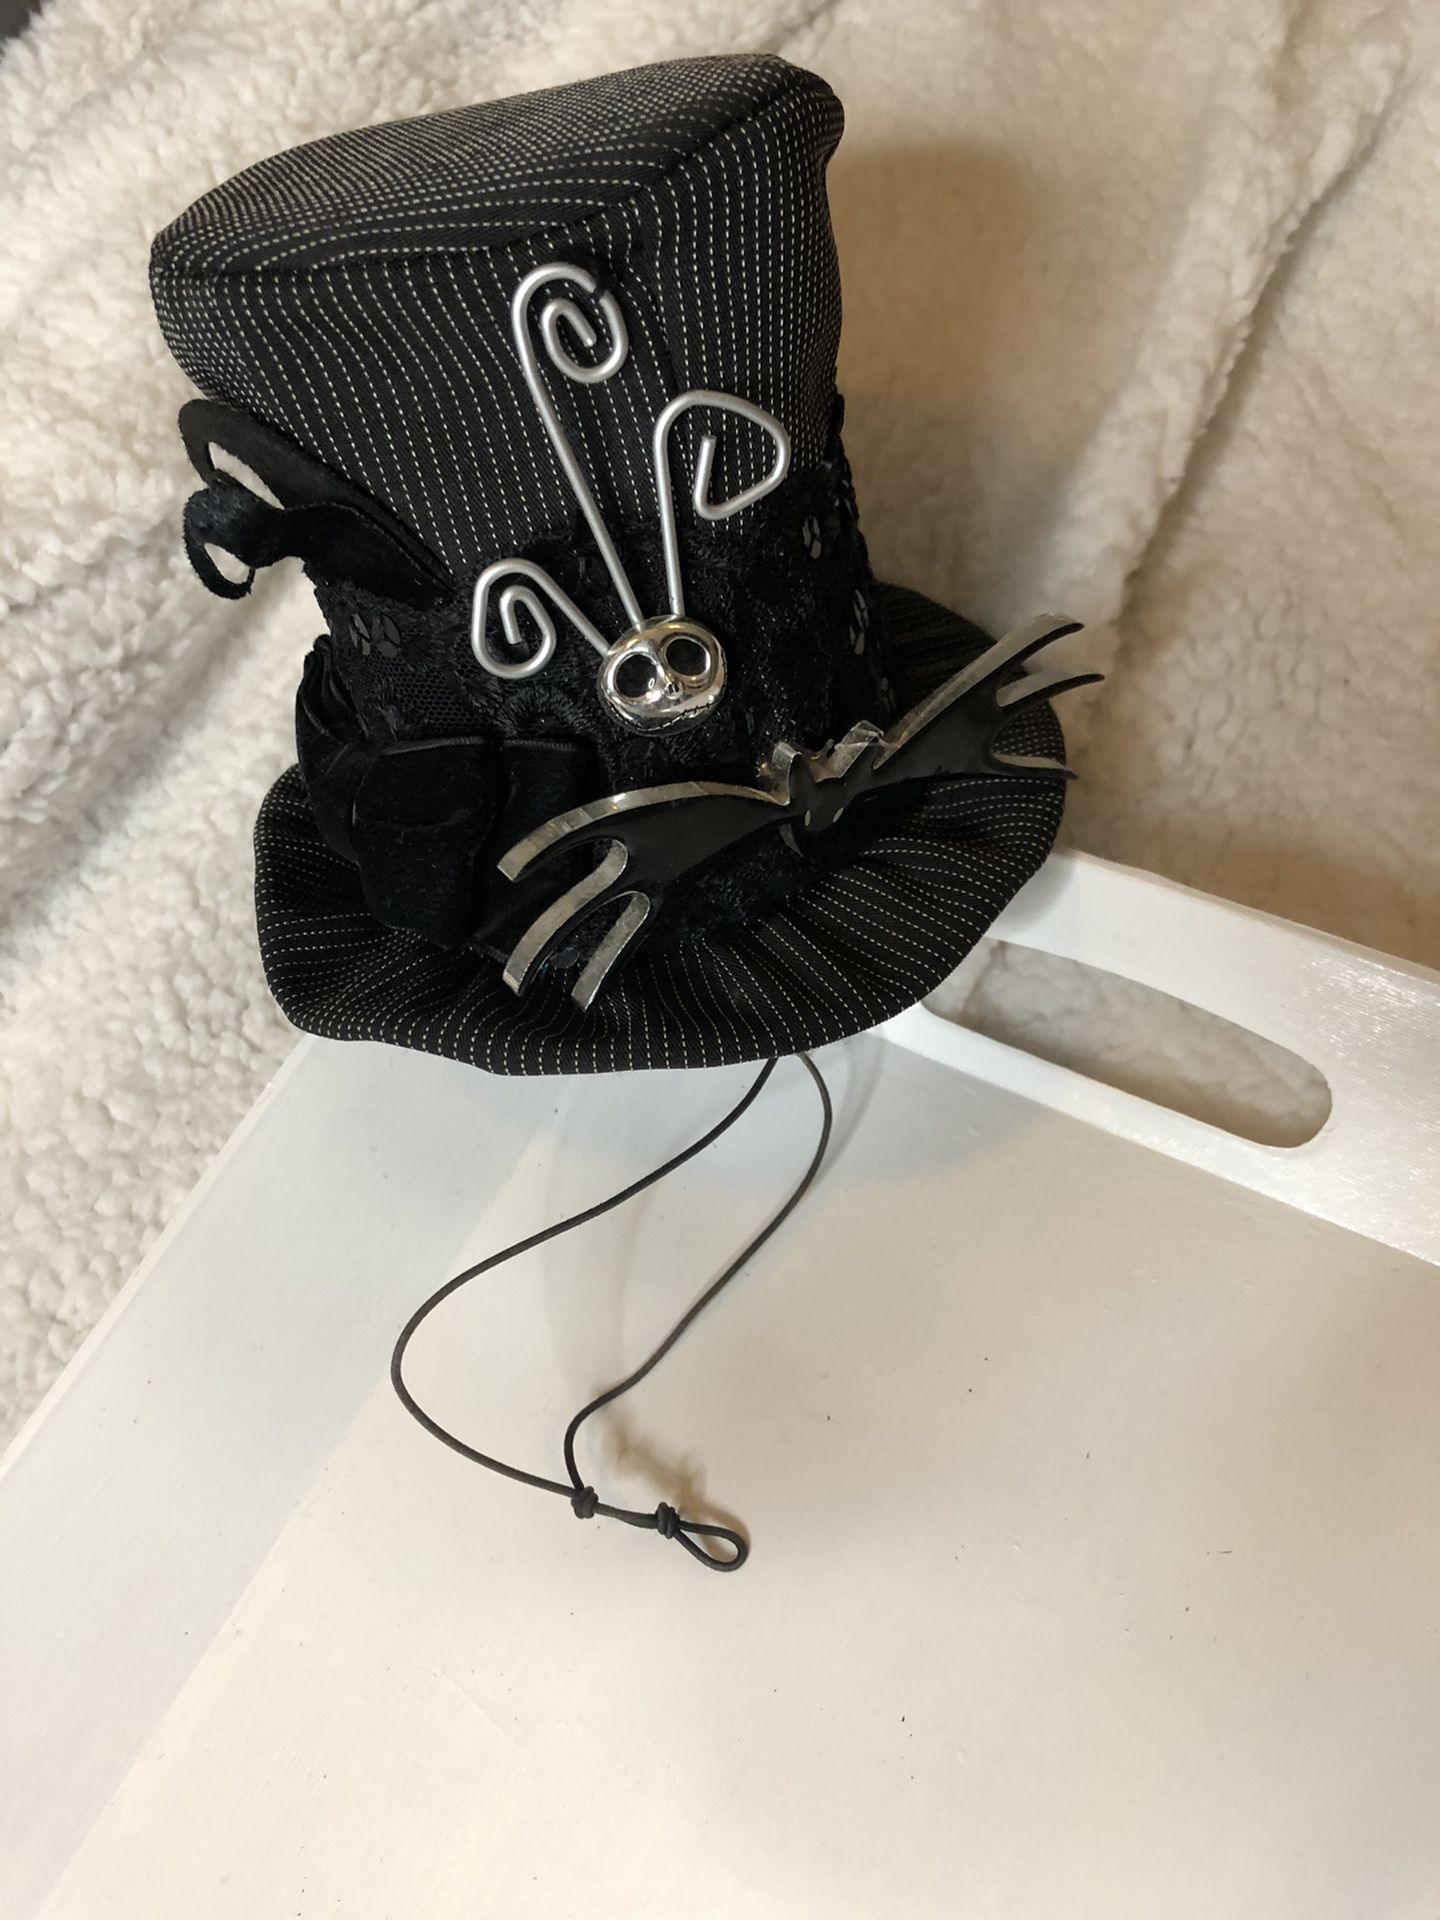 Authentic Nightmare Before Christmas themed mini hat